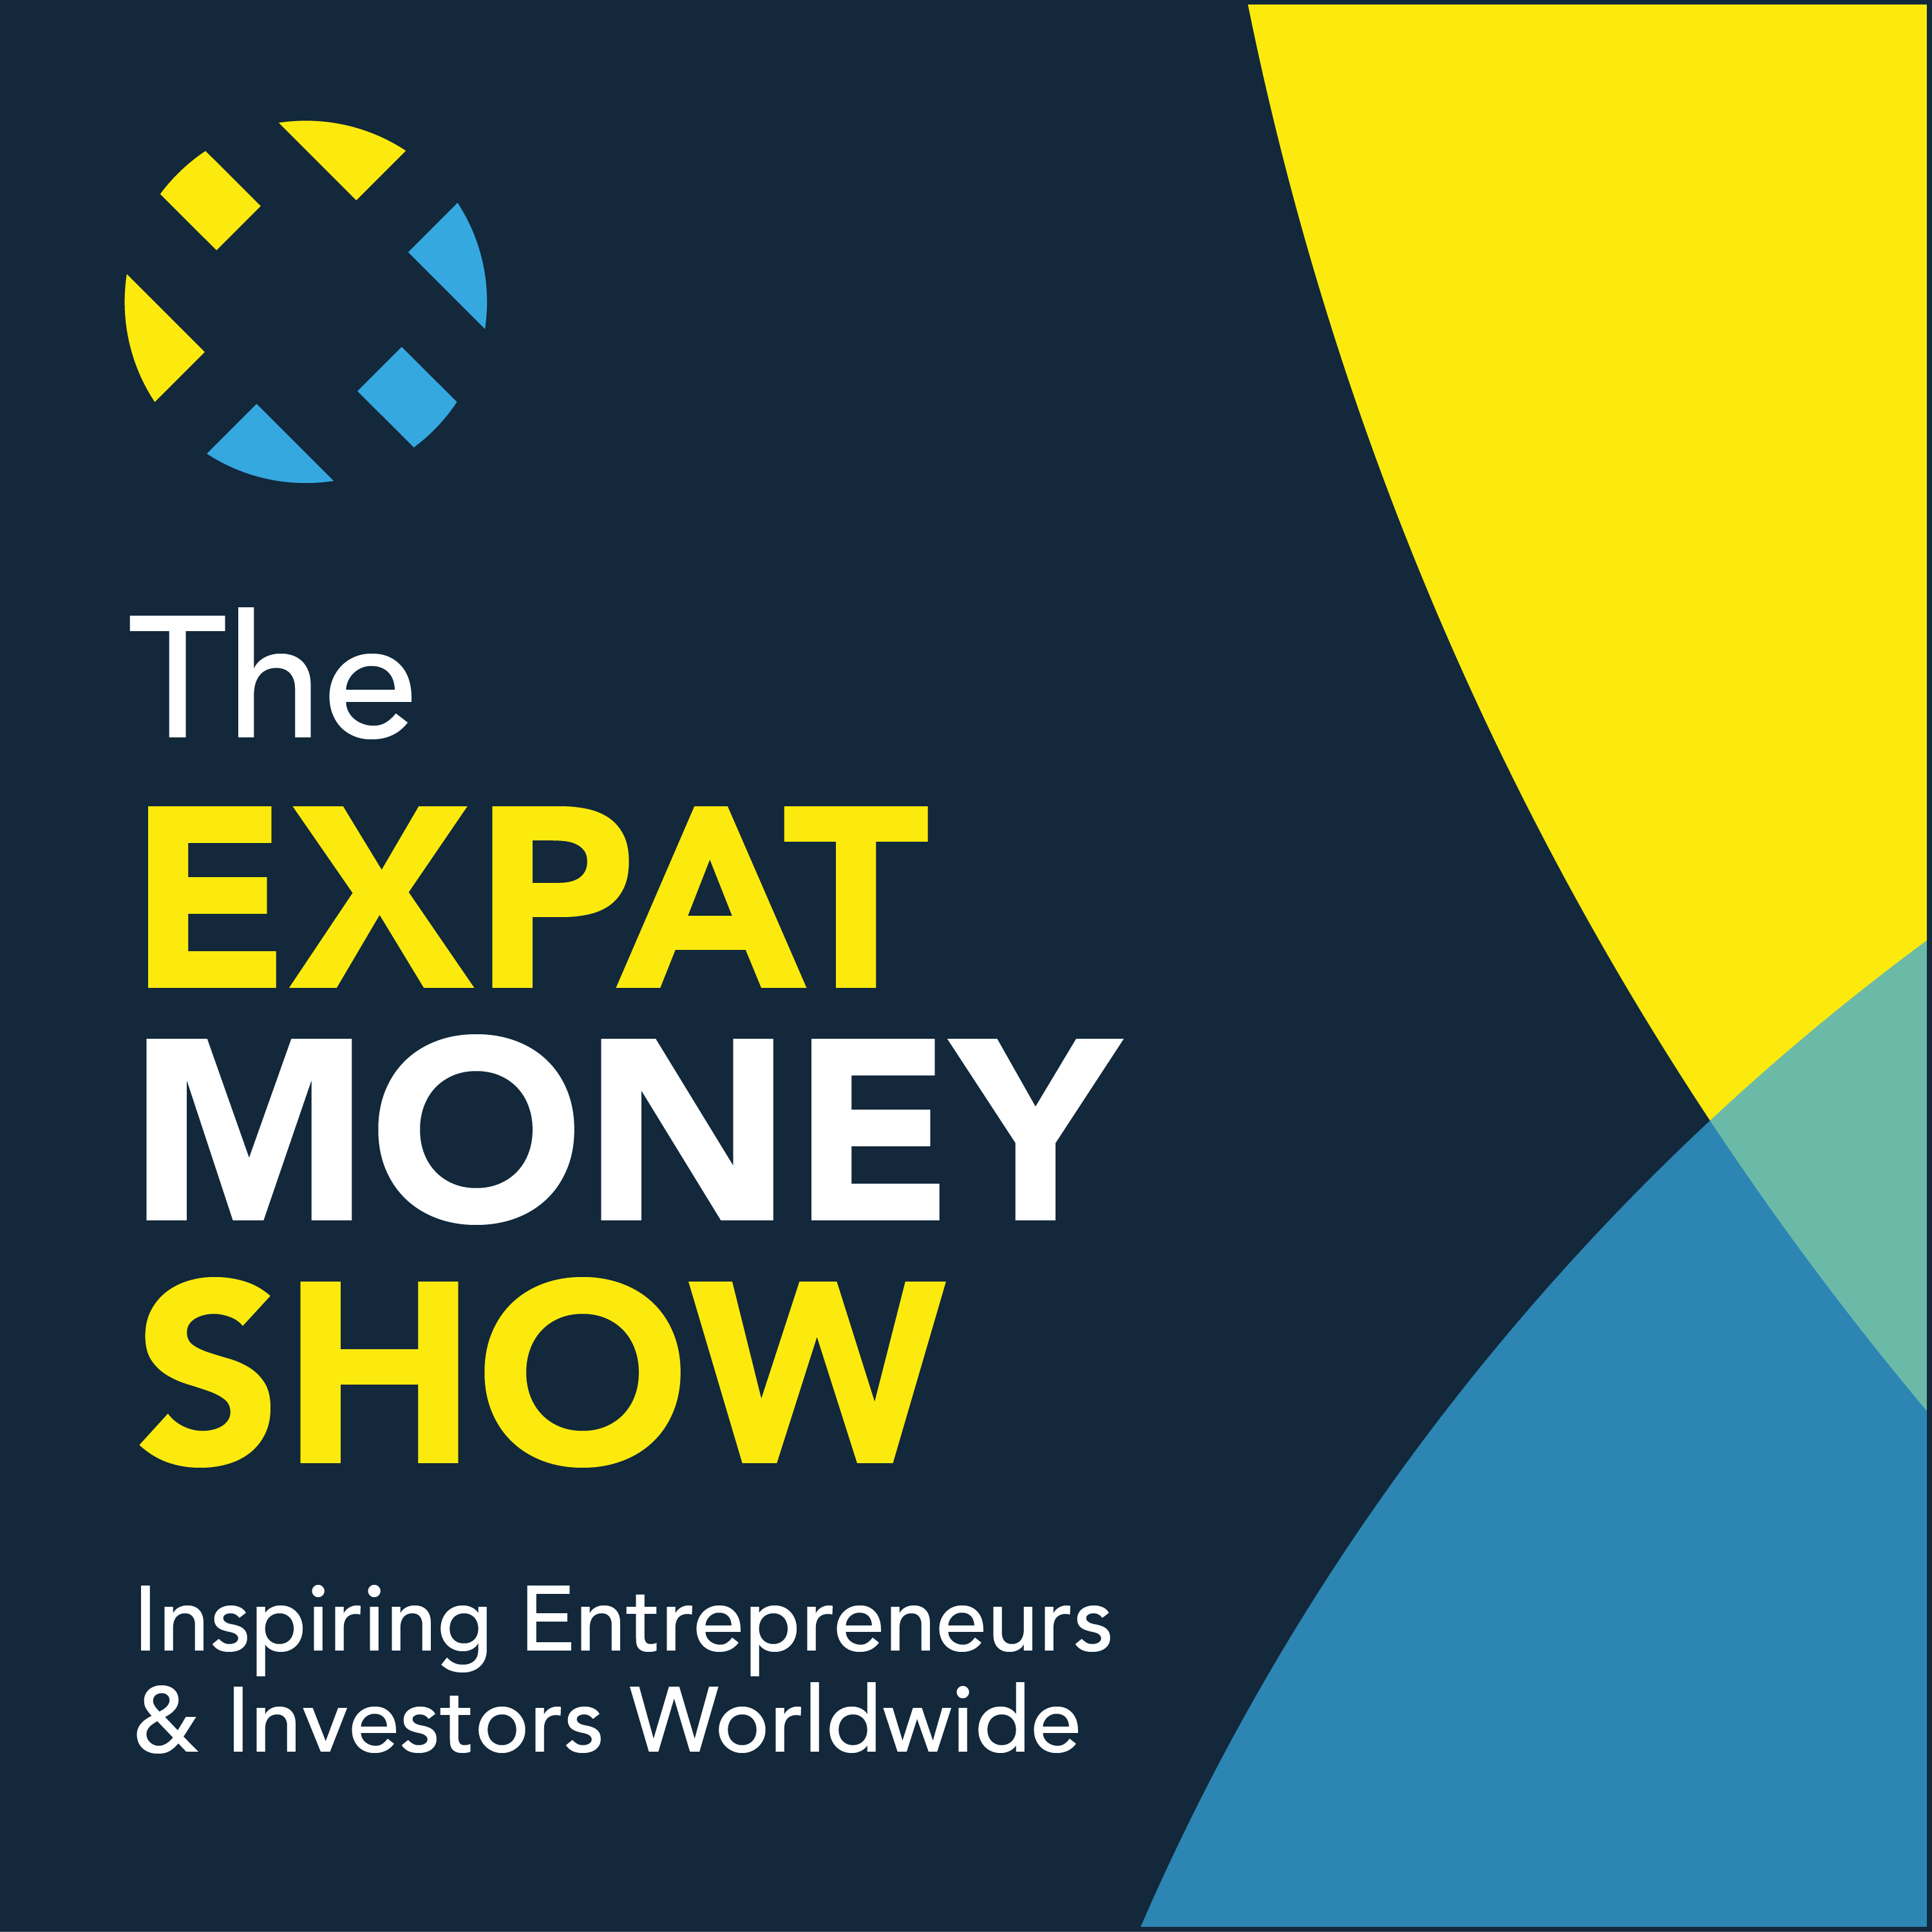 Artwork for podcast The Expat Money Show - With Mikkel Thorup